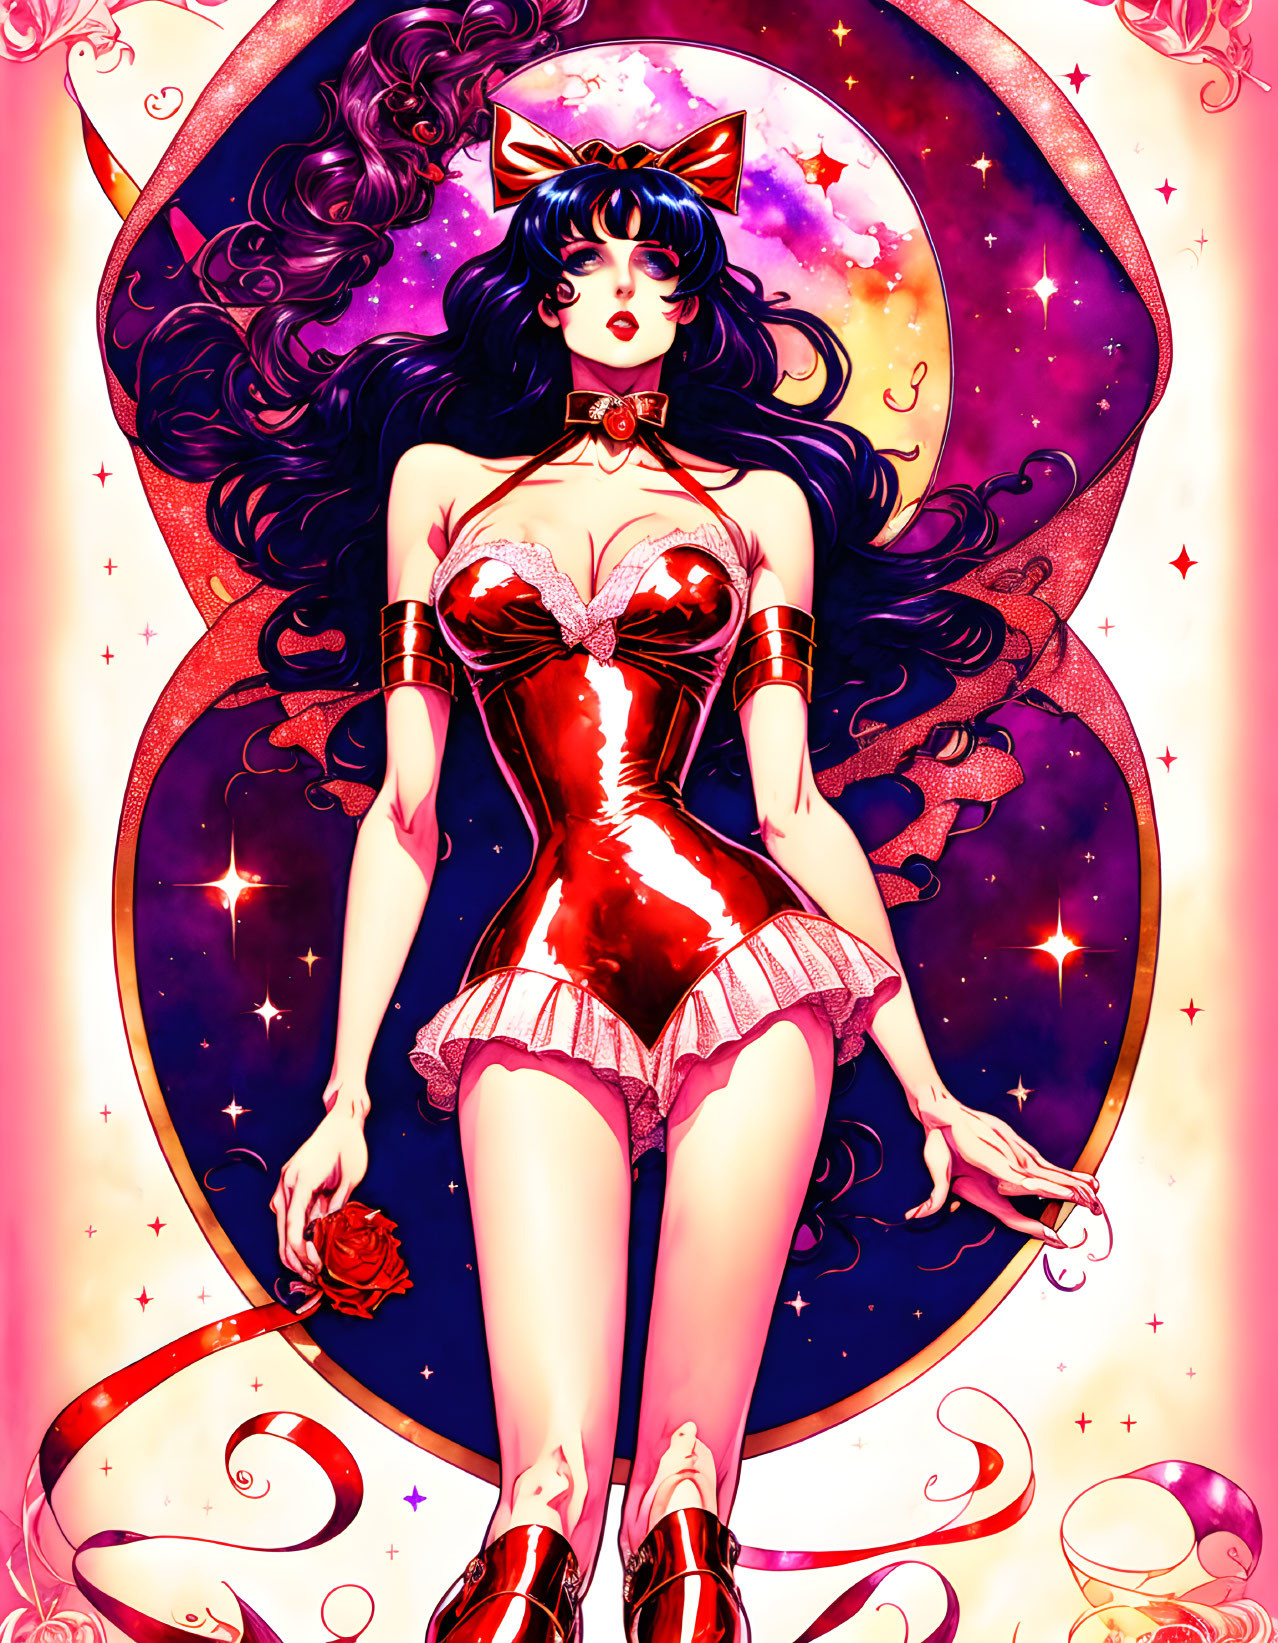 Colorful illustration: Woman in cat ears, red outfit, cosmic and floral backdrop